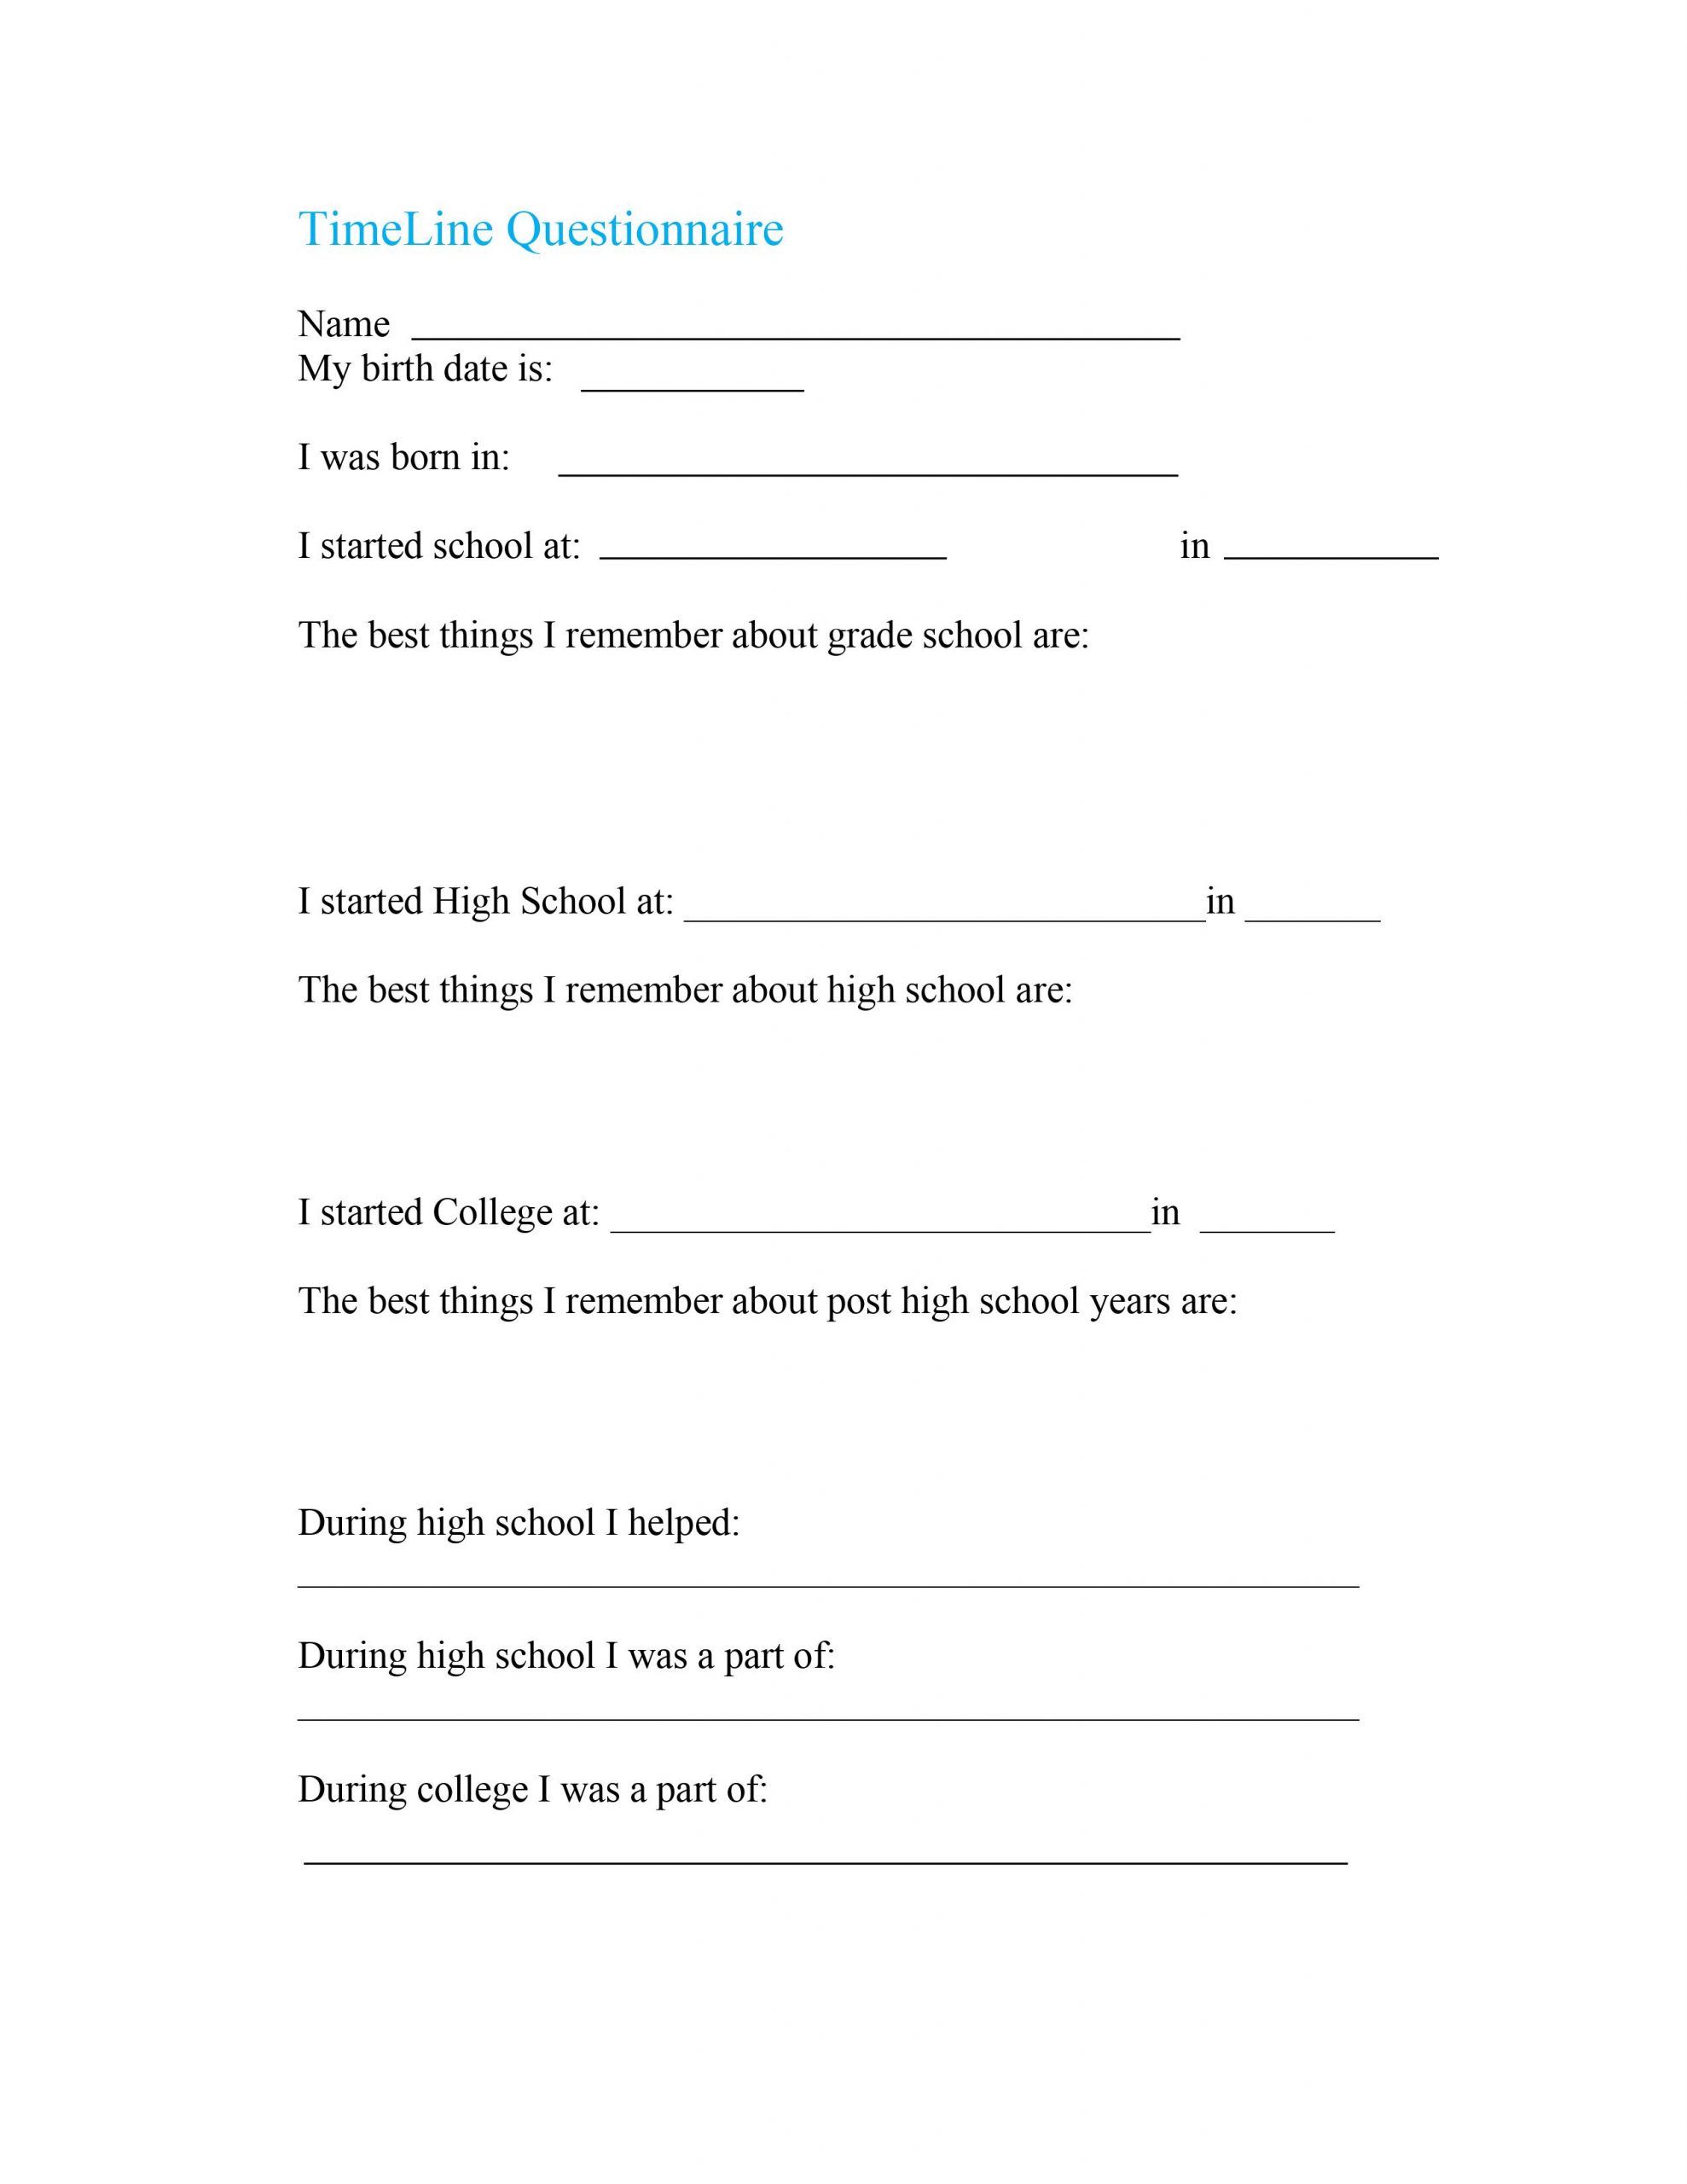 My TimeLine Questionaire